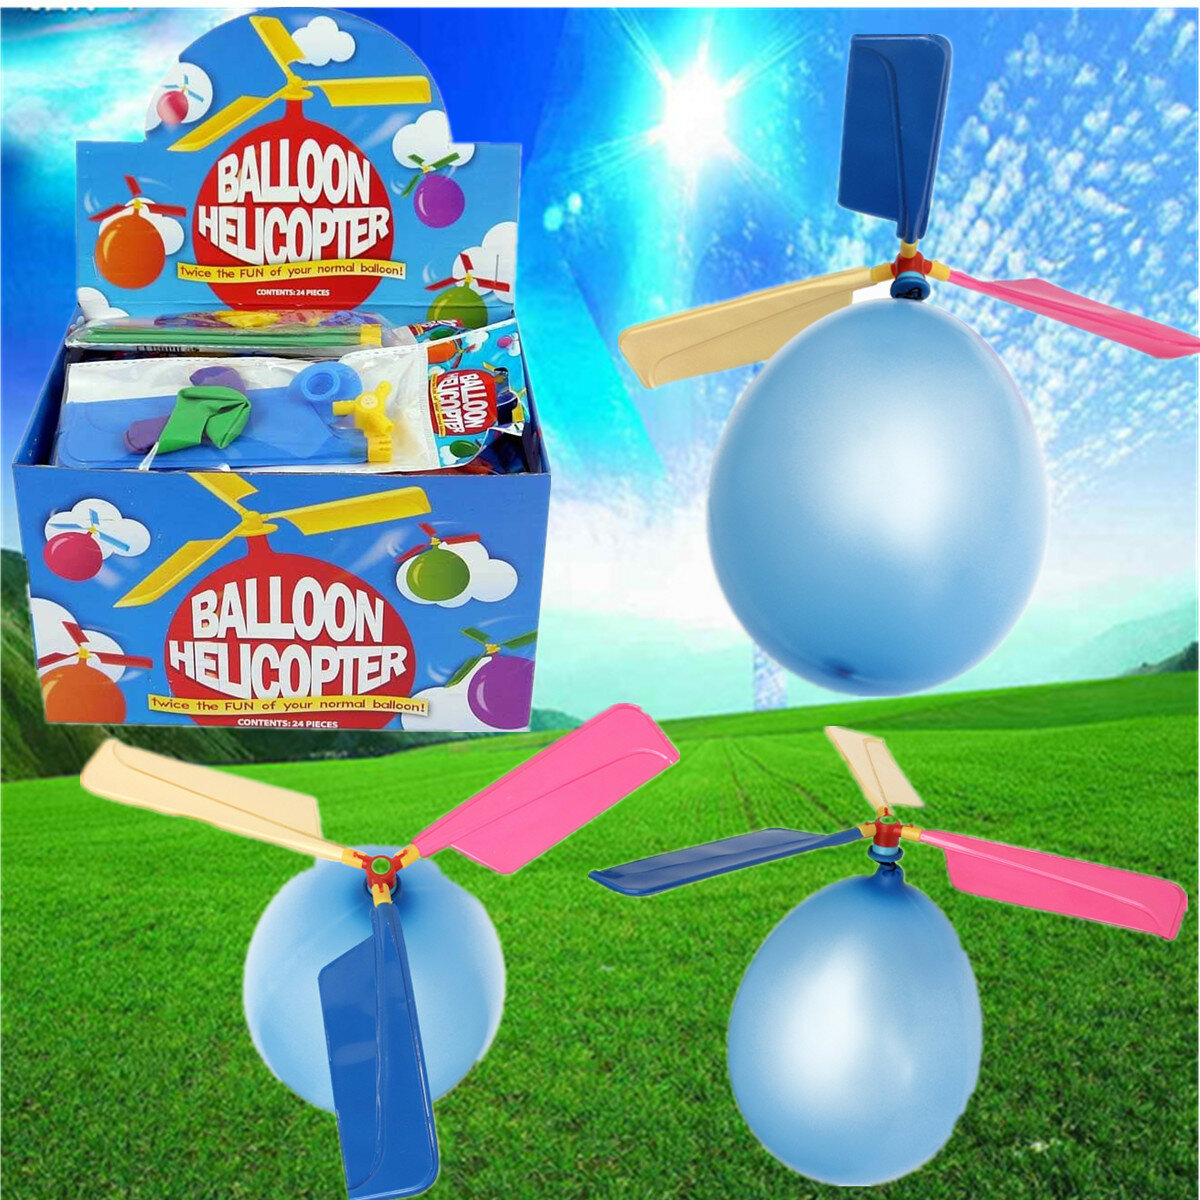 balloon helicopter toy